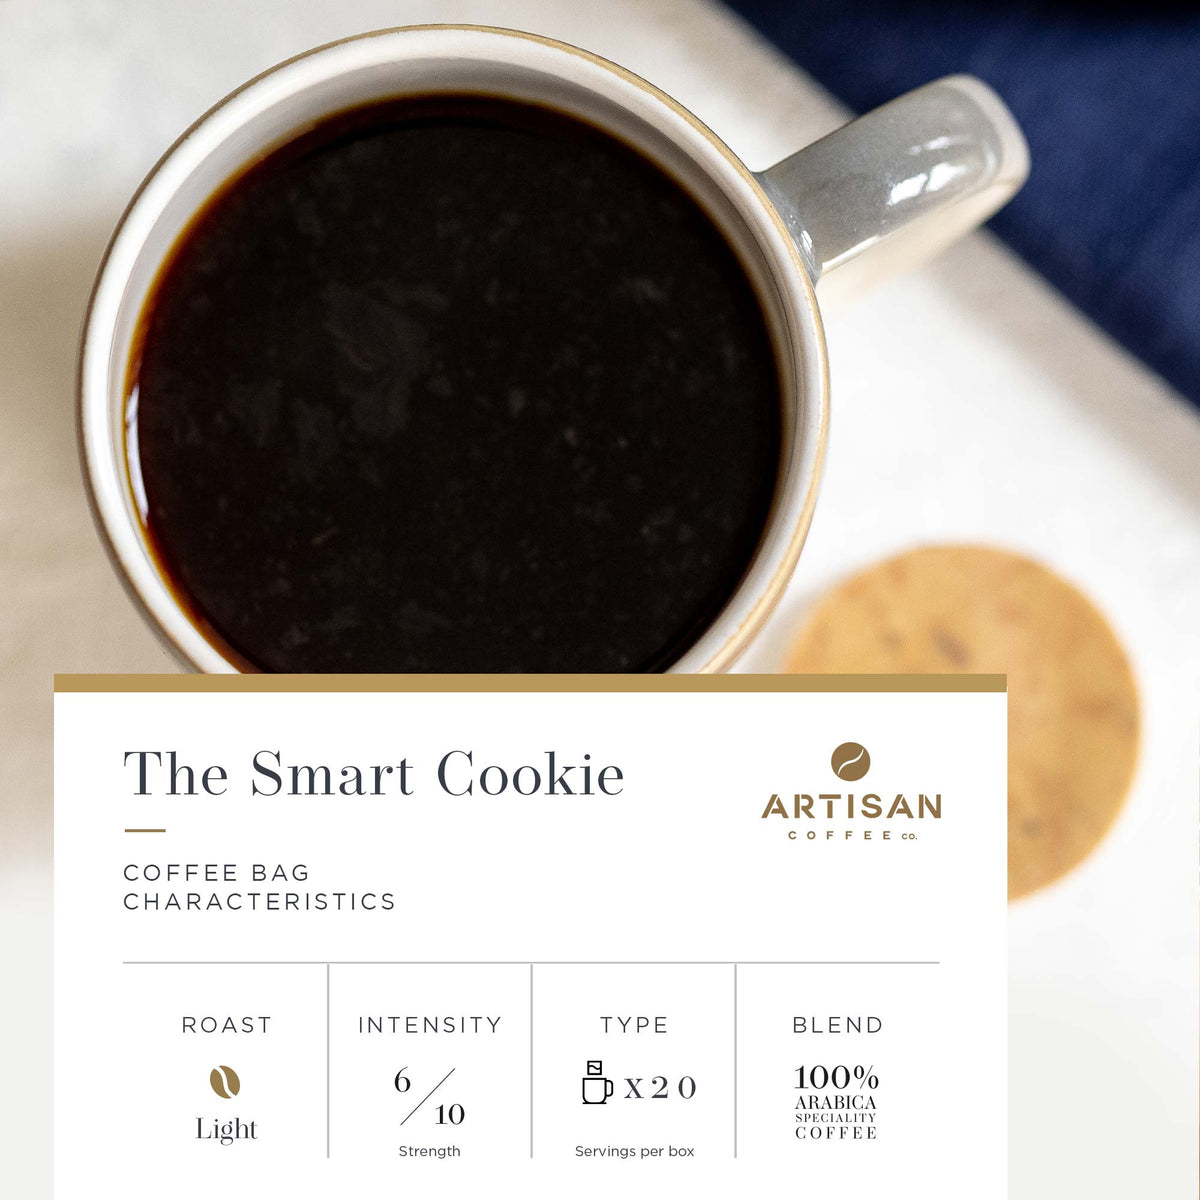 Artisan Coffee Co The Smart Cookie Coffee bags Infographic characteristics